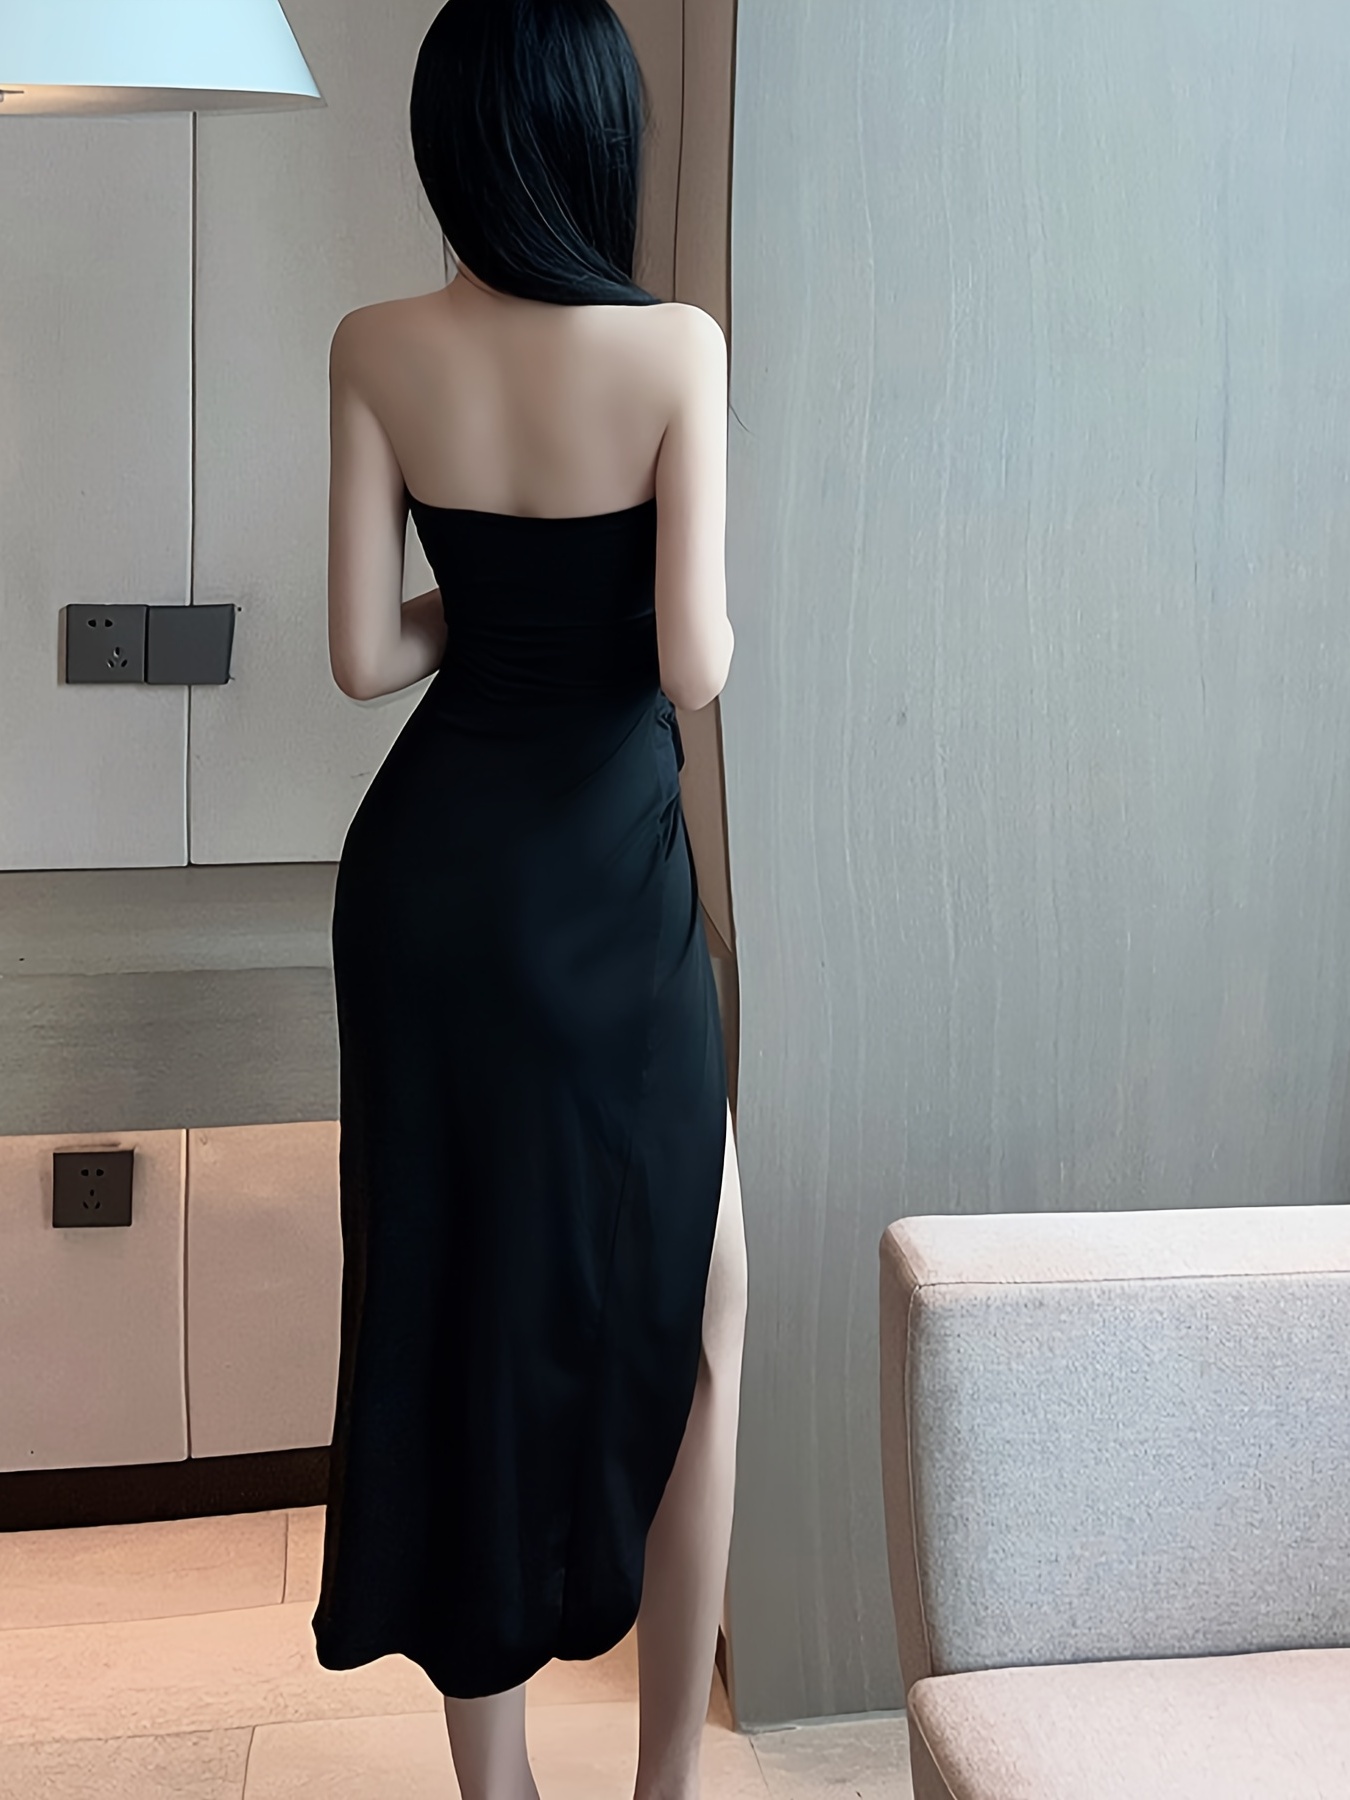 Womens Backless Dress With Side Slit